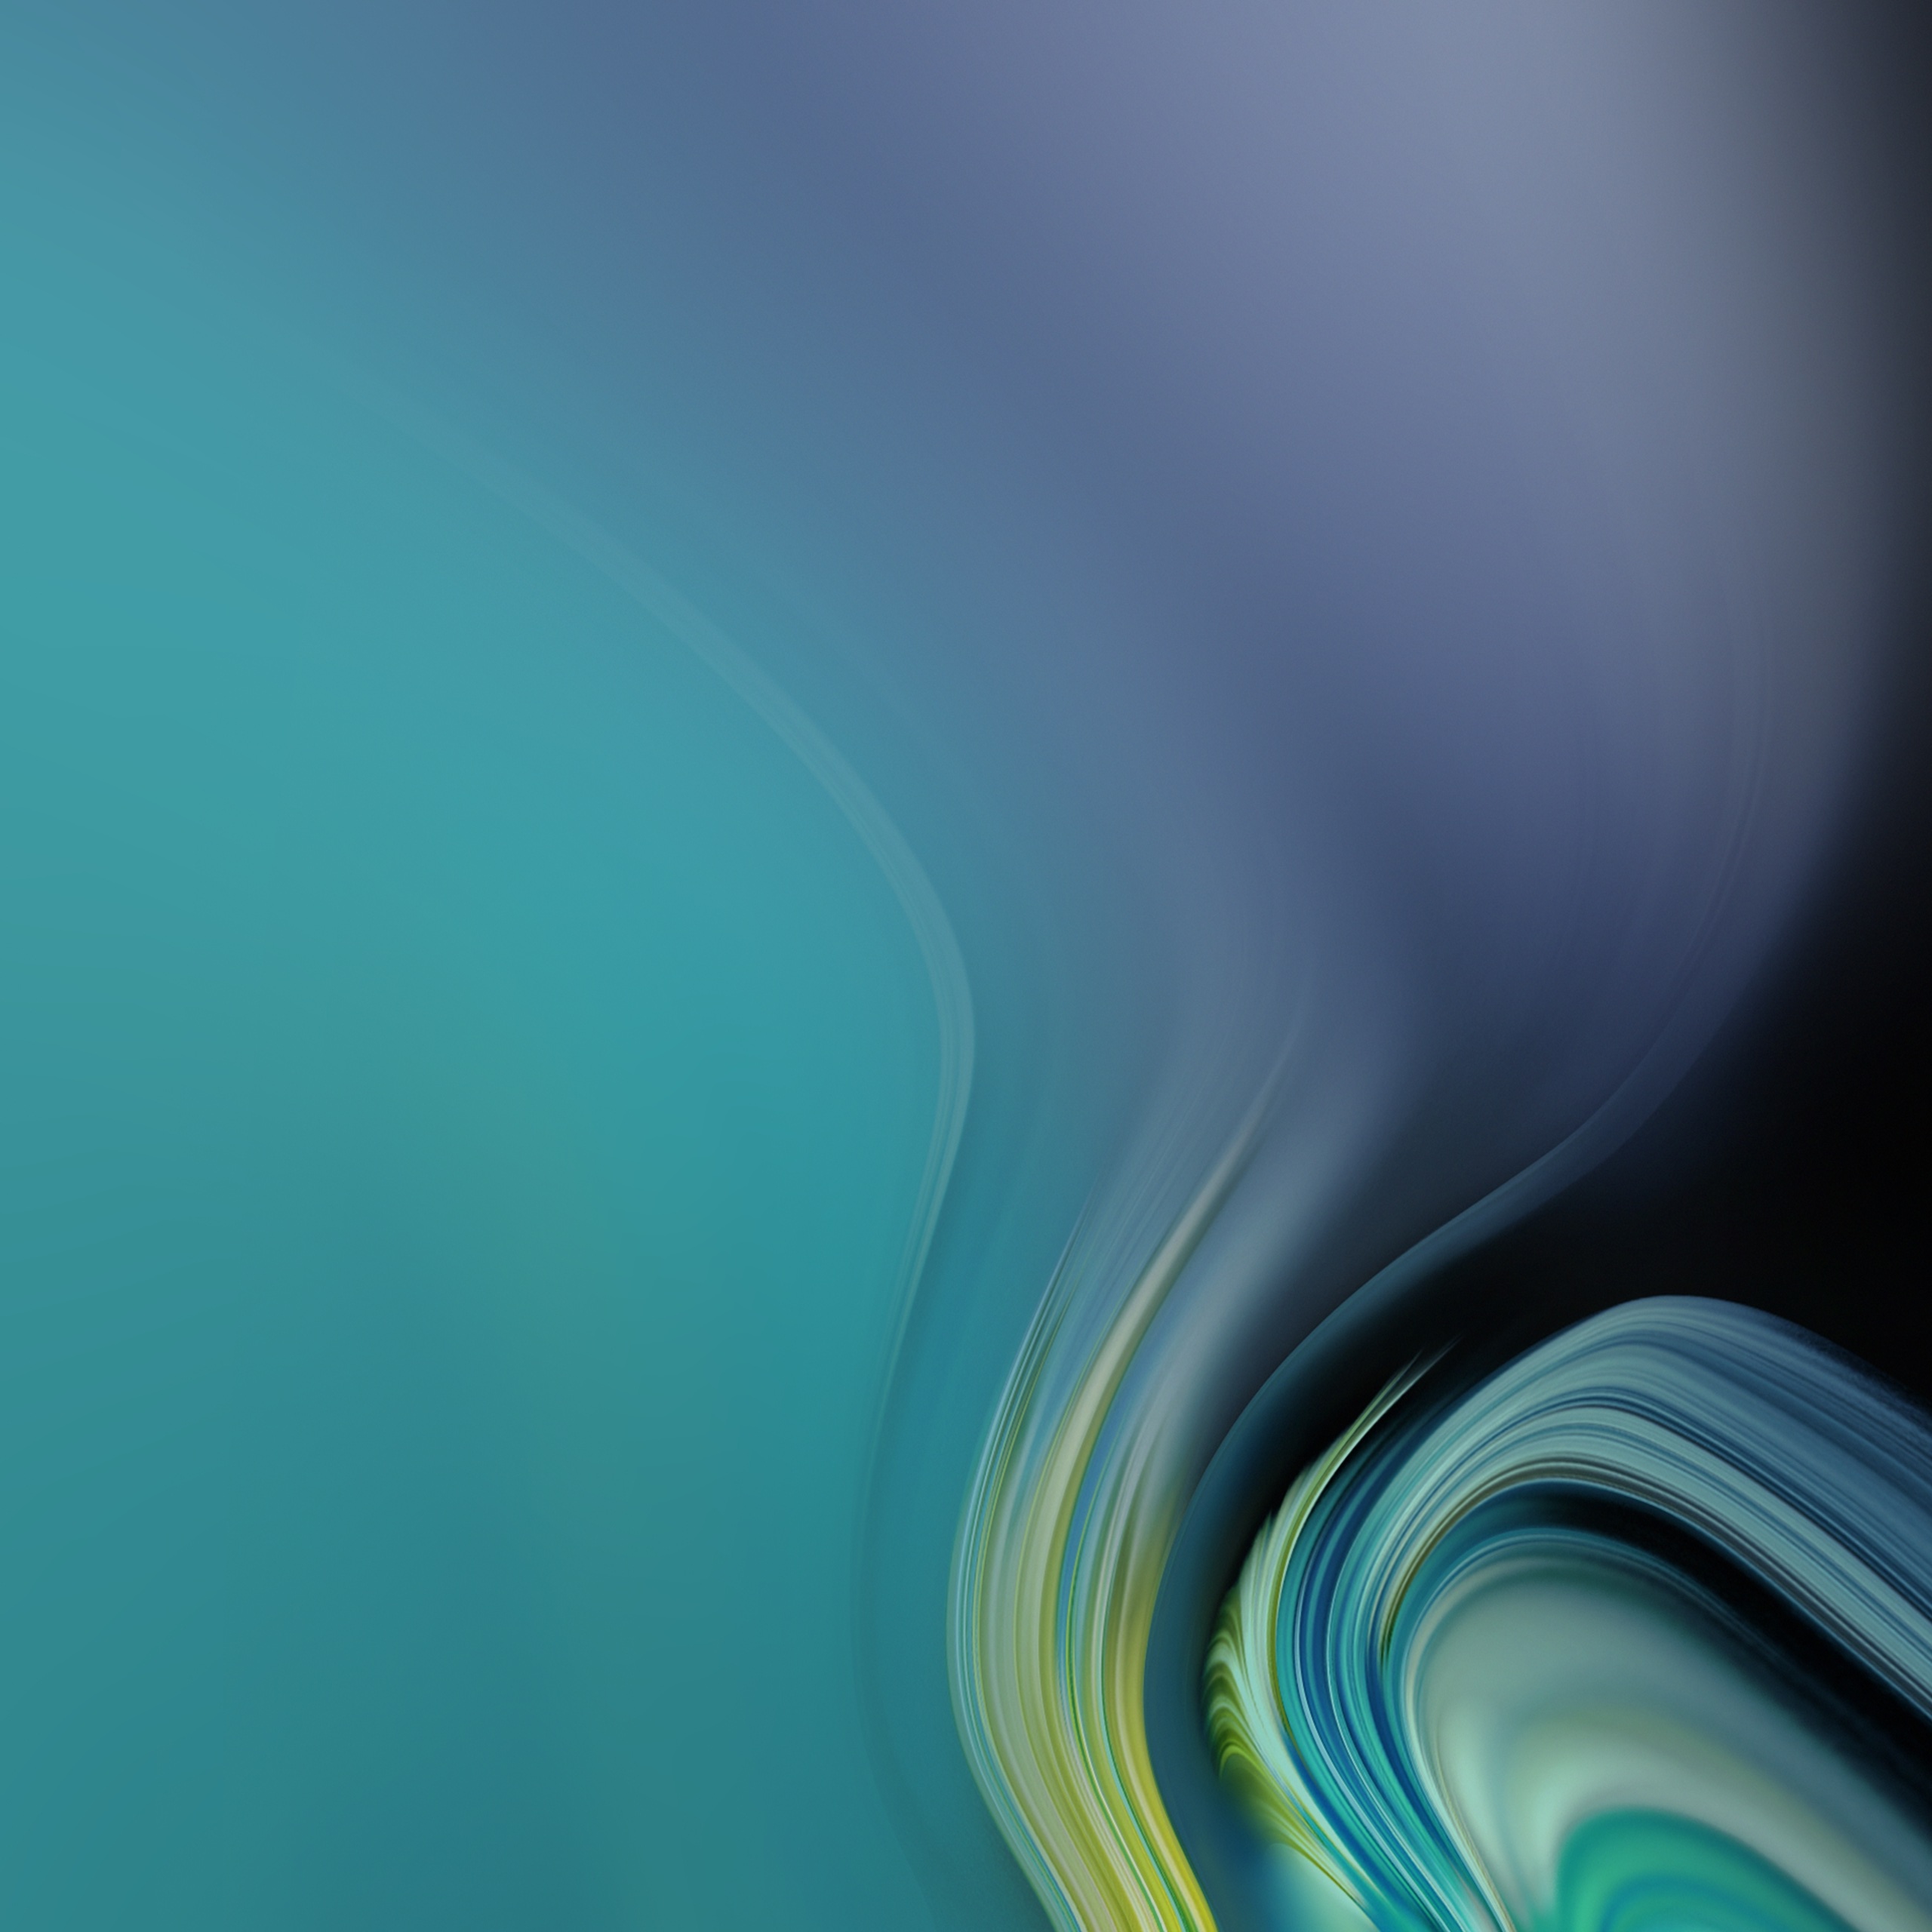 mobile wallpapers hd for samsung,blue,aqua,green,turquoise,teal